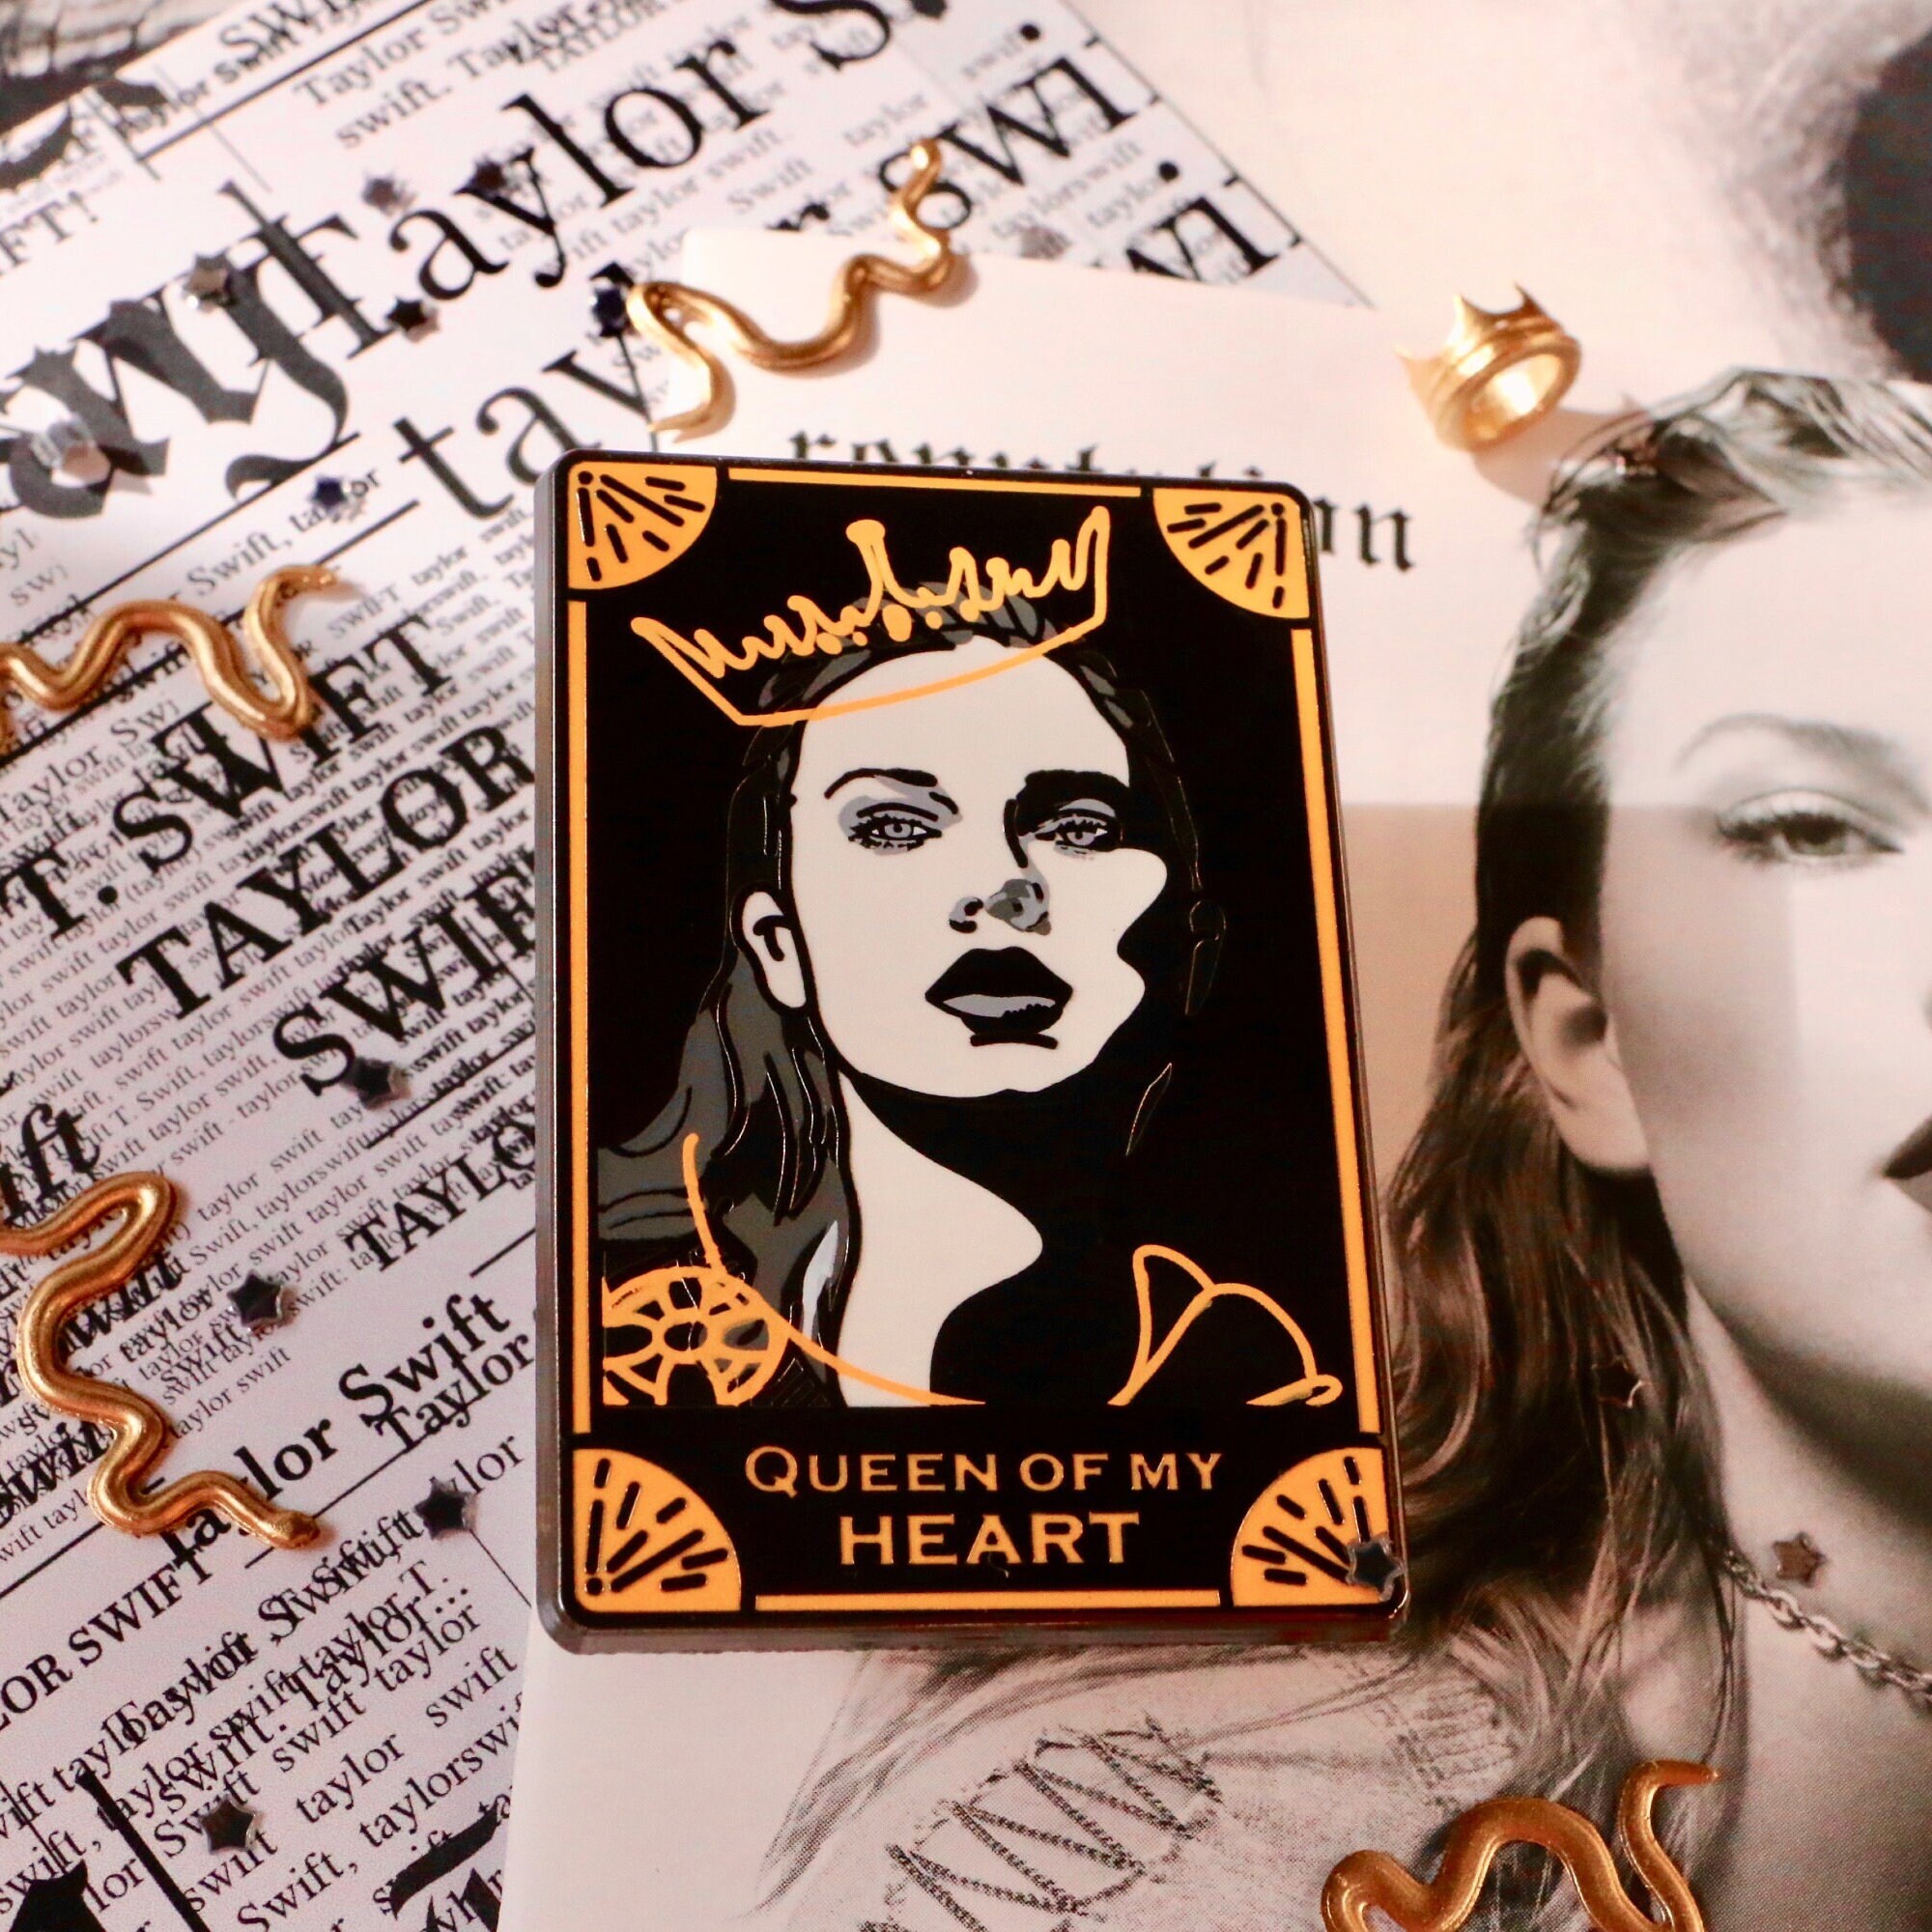 Taylor swift patches! : r/TaylorSwift